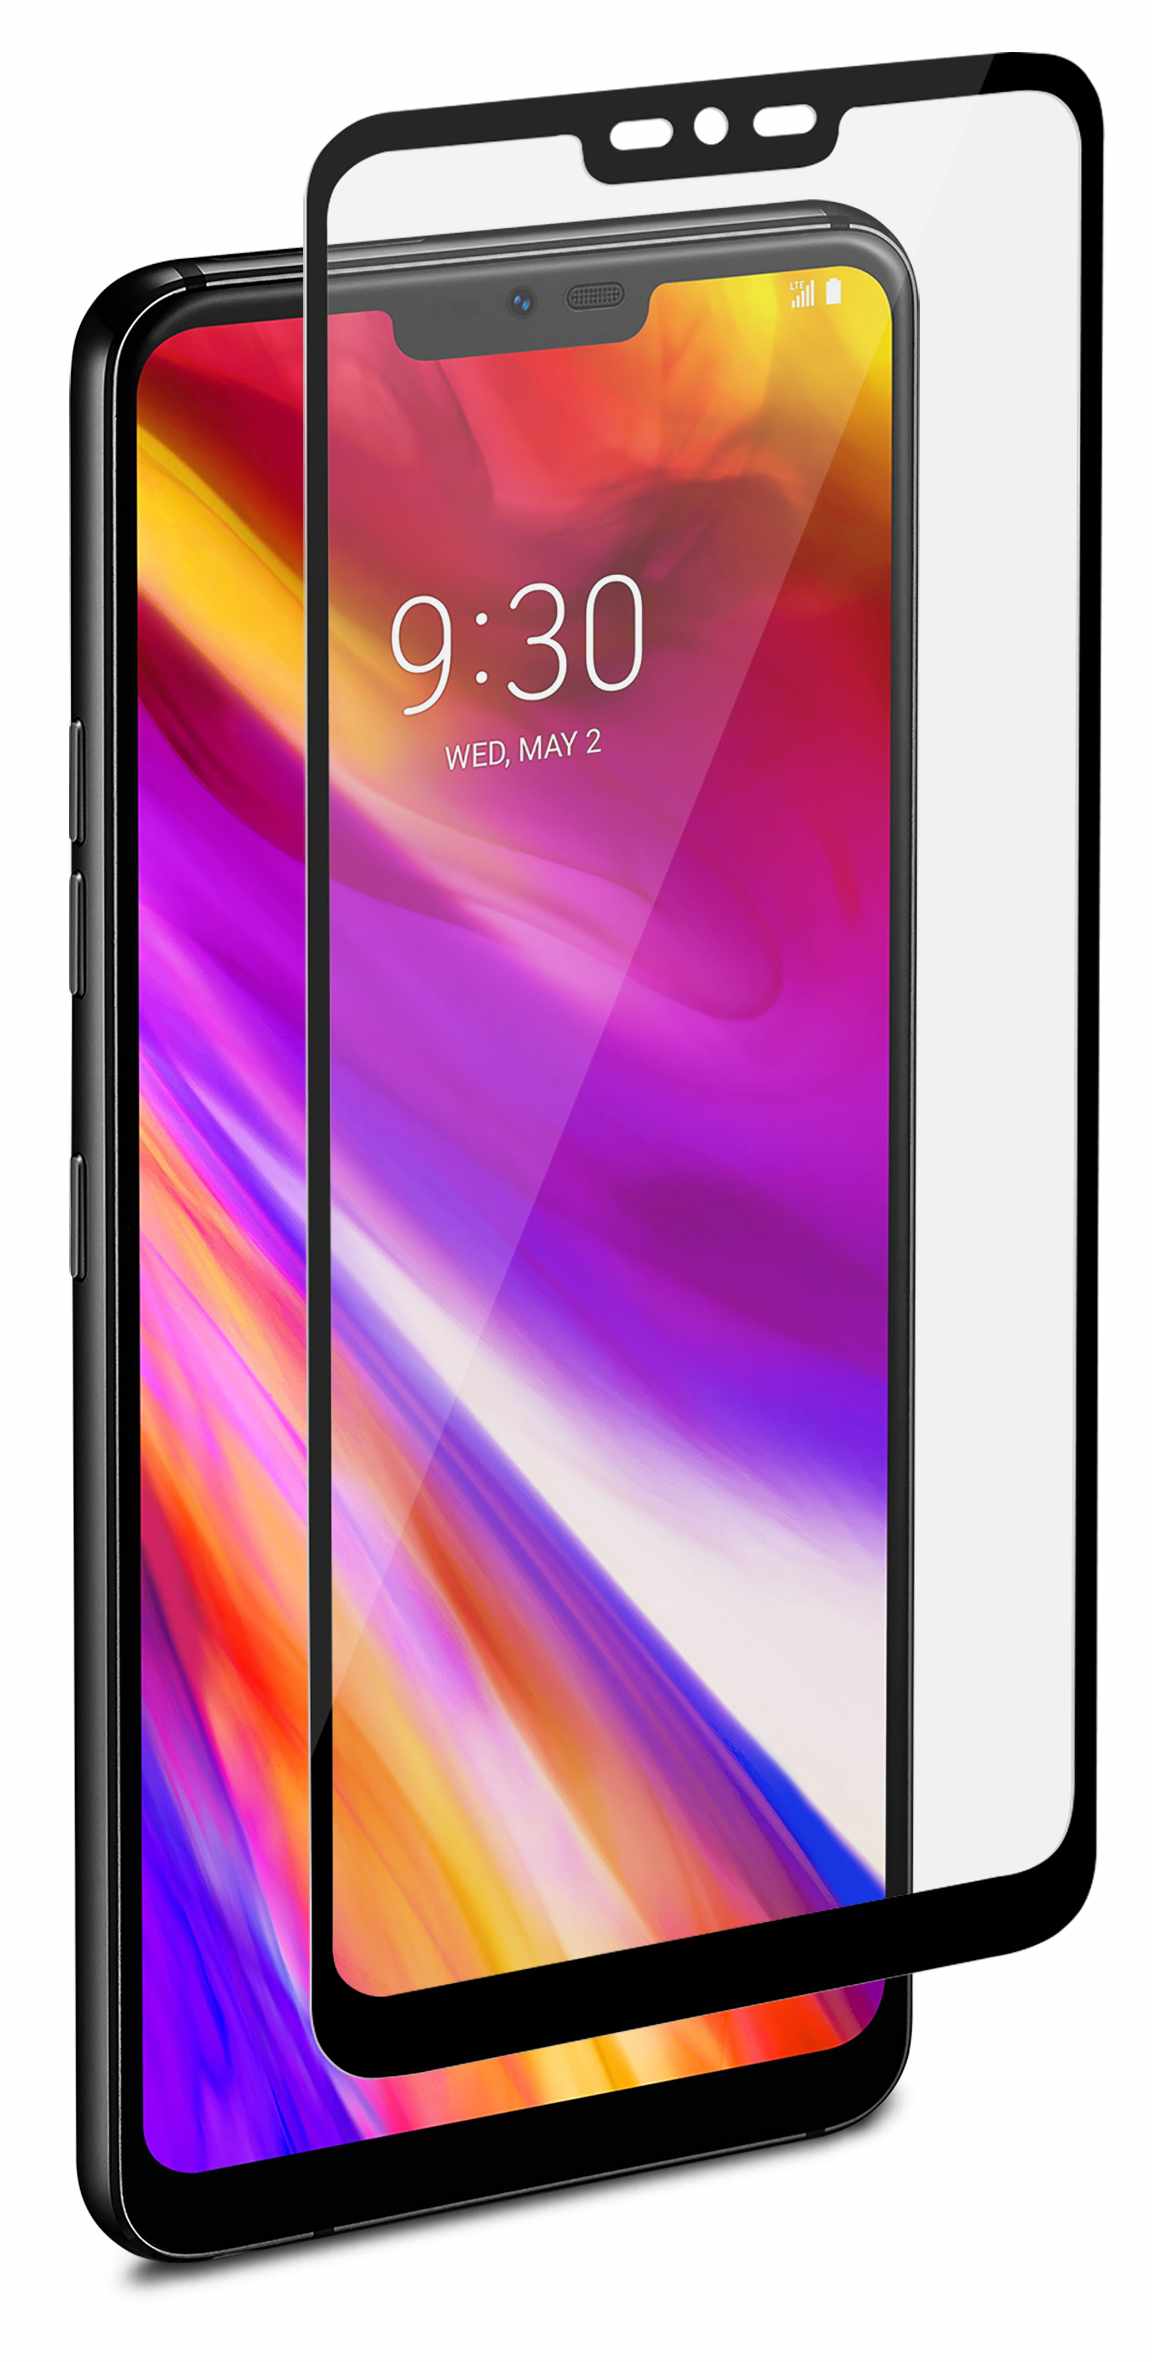 3D Curved Glass Screen Protector for LG G7 One/G7 ThinQ